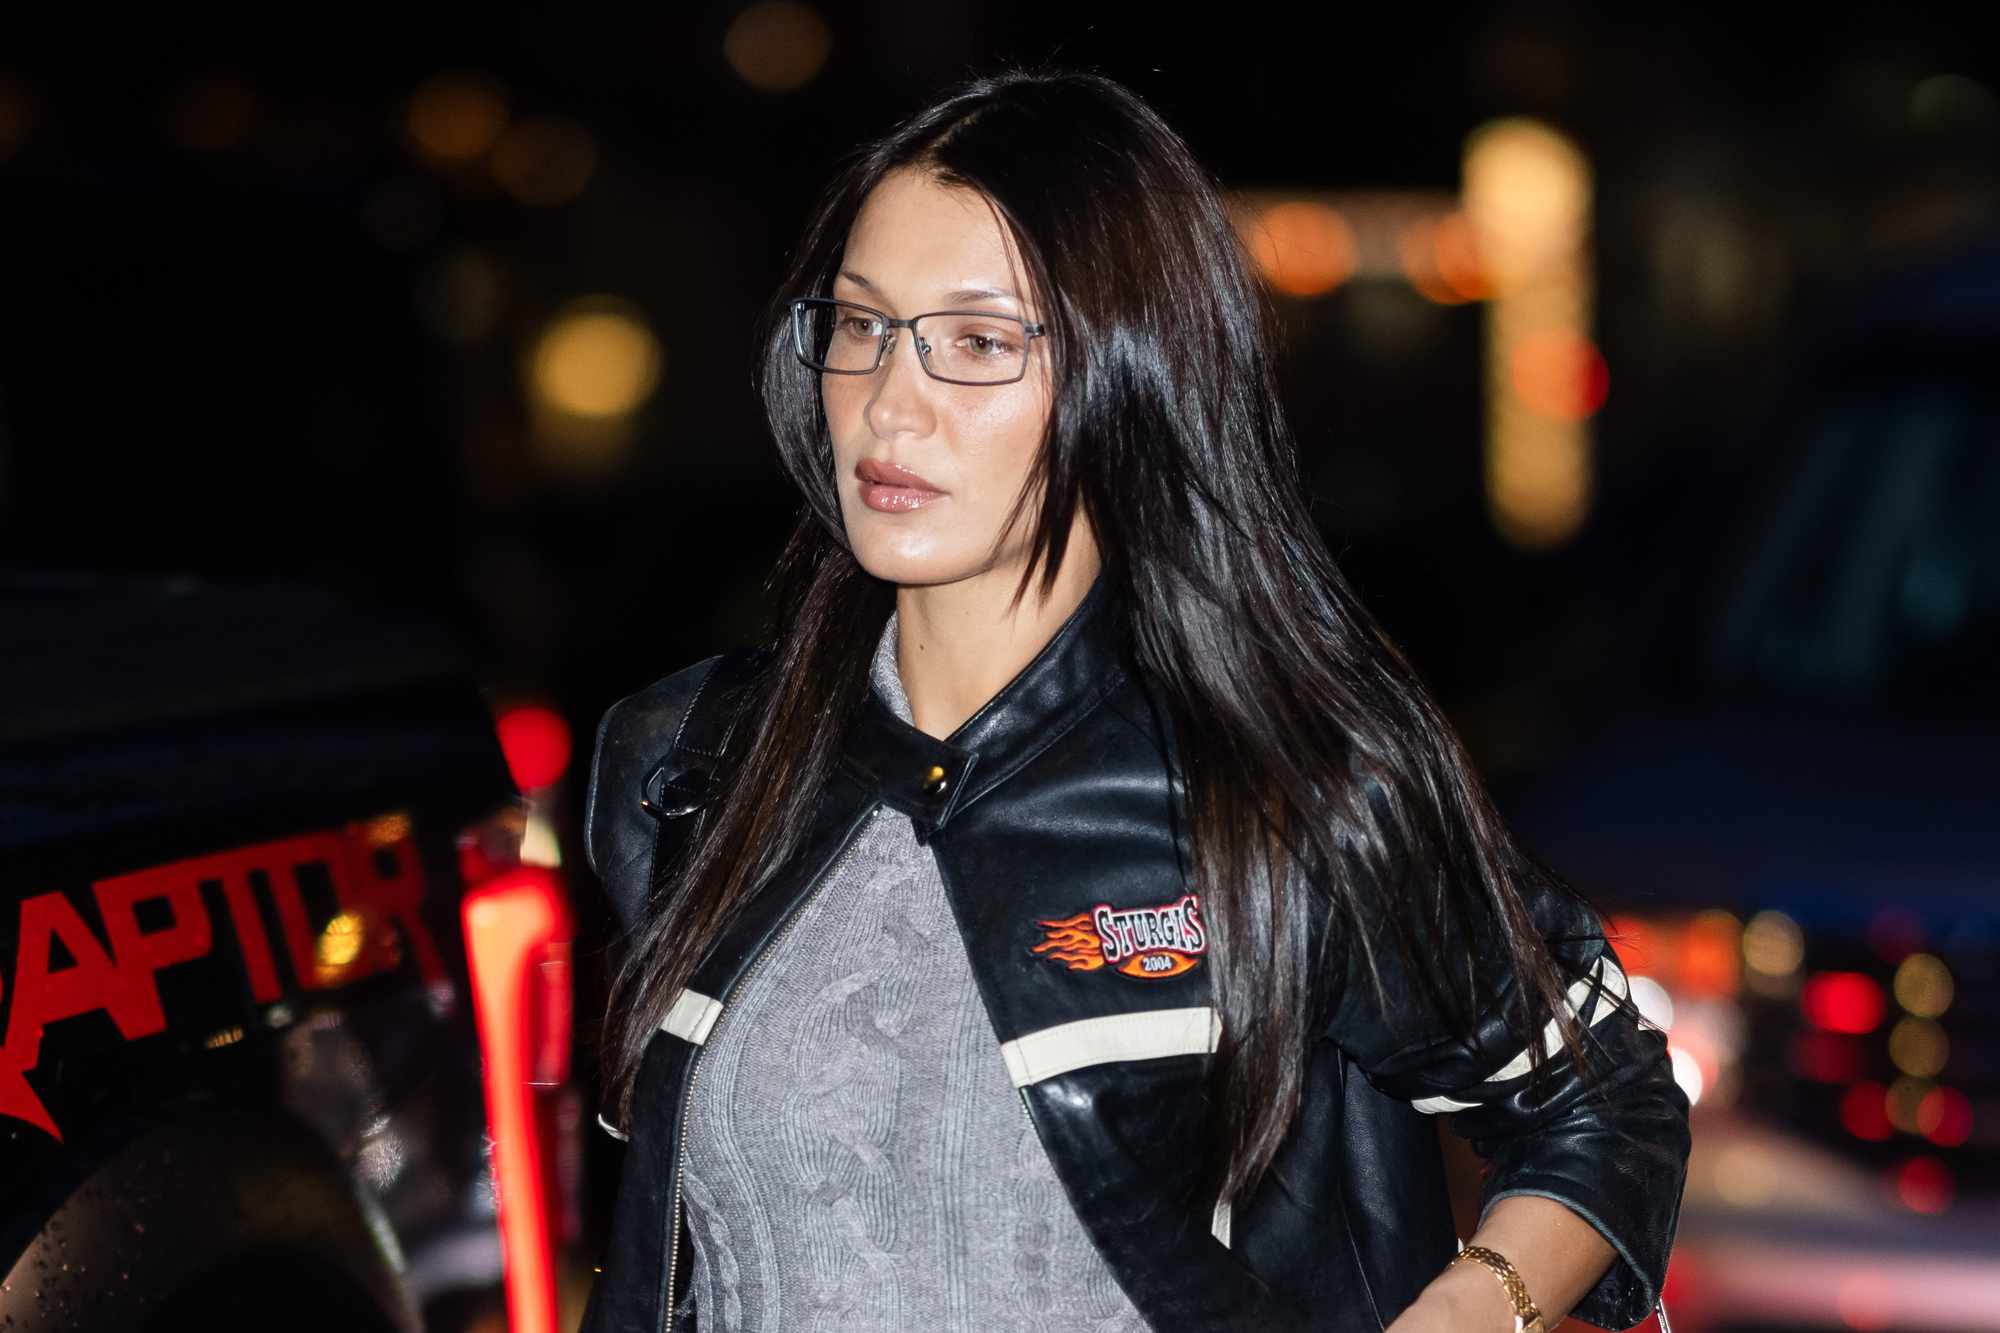 Bella Hadid wears thin-frame glasses, a black leather racing jacket, and teal knit sweater in New York on December 17